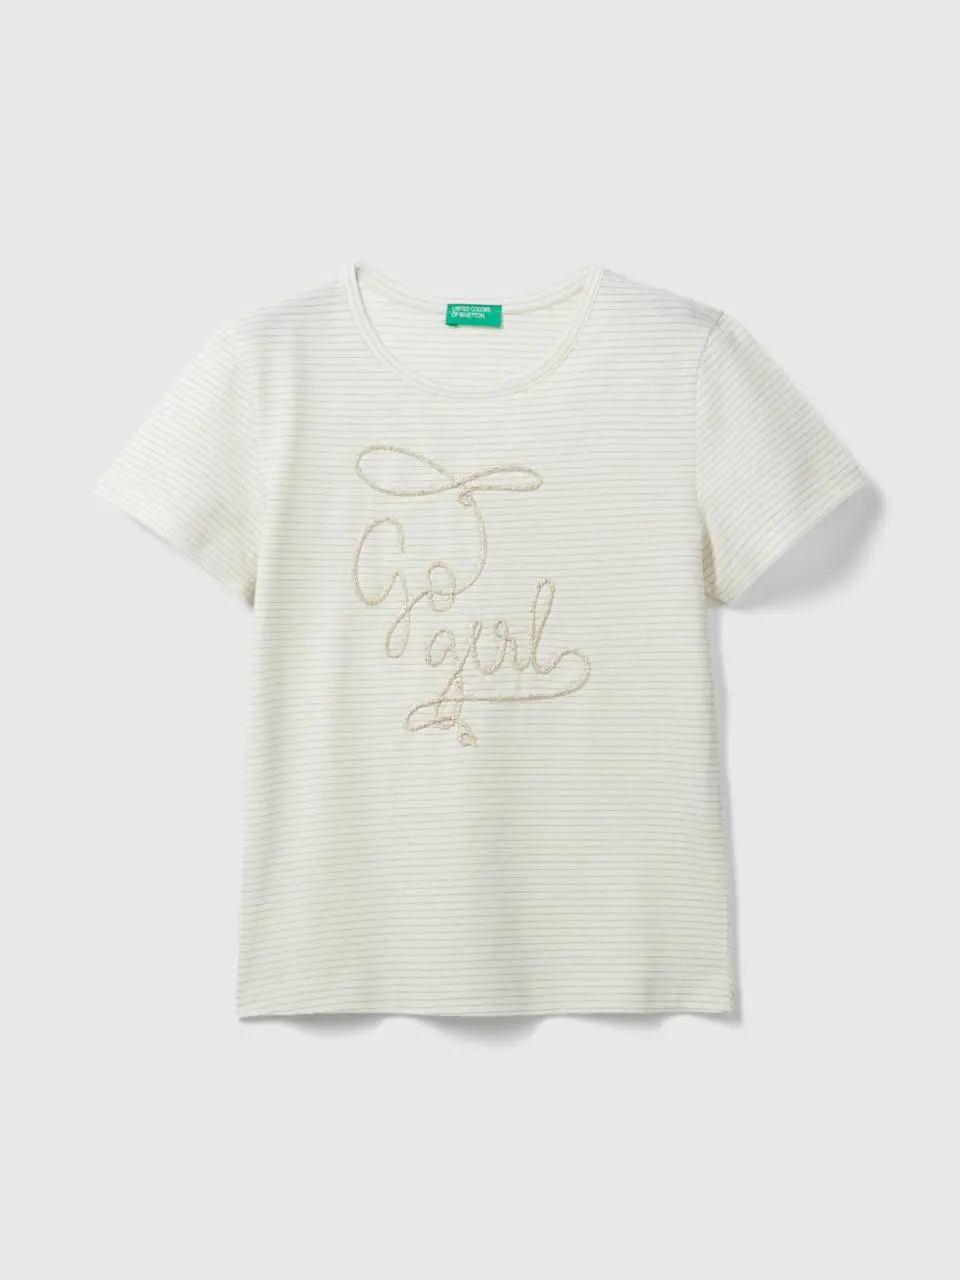 Benetton t-shirt with cord embroidery. 1